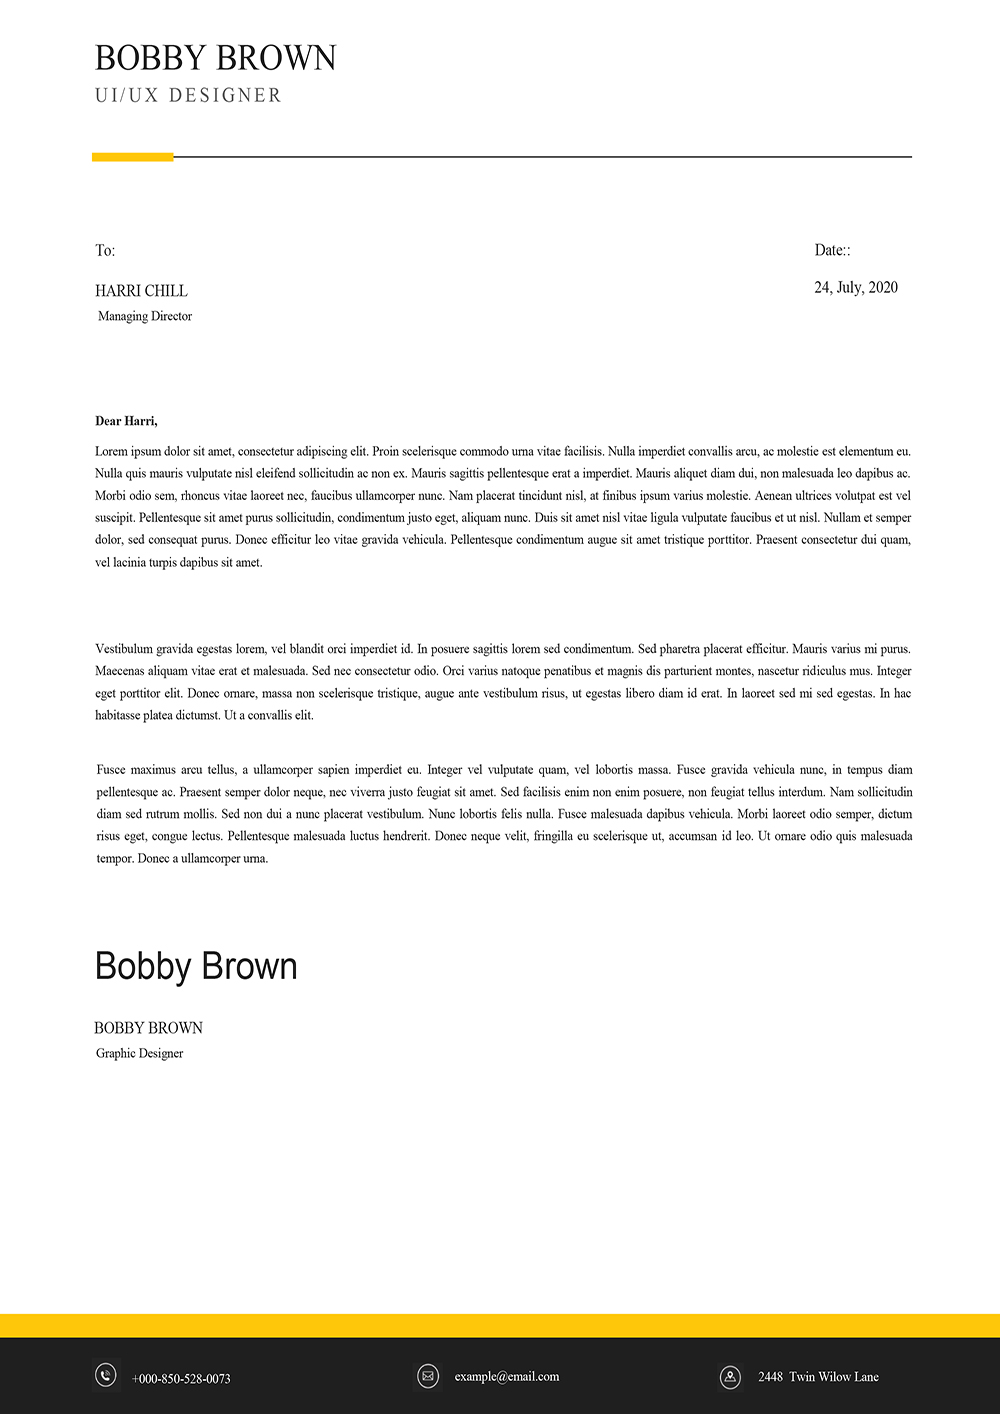 Proper cover letter layout - formHop